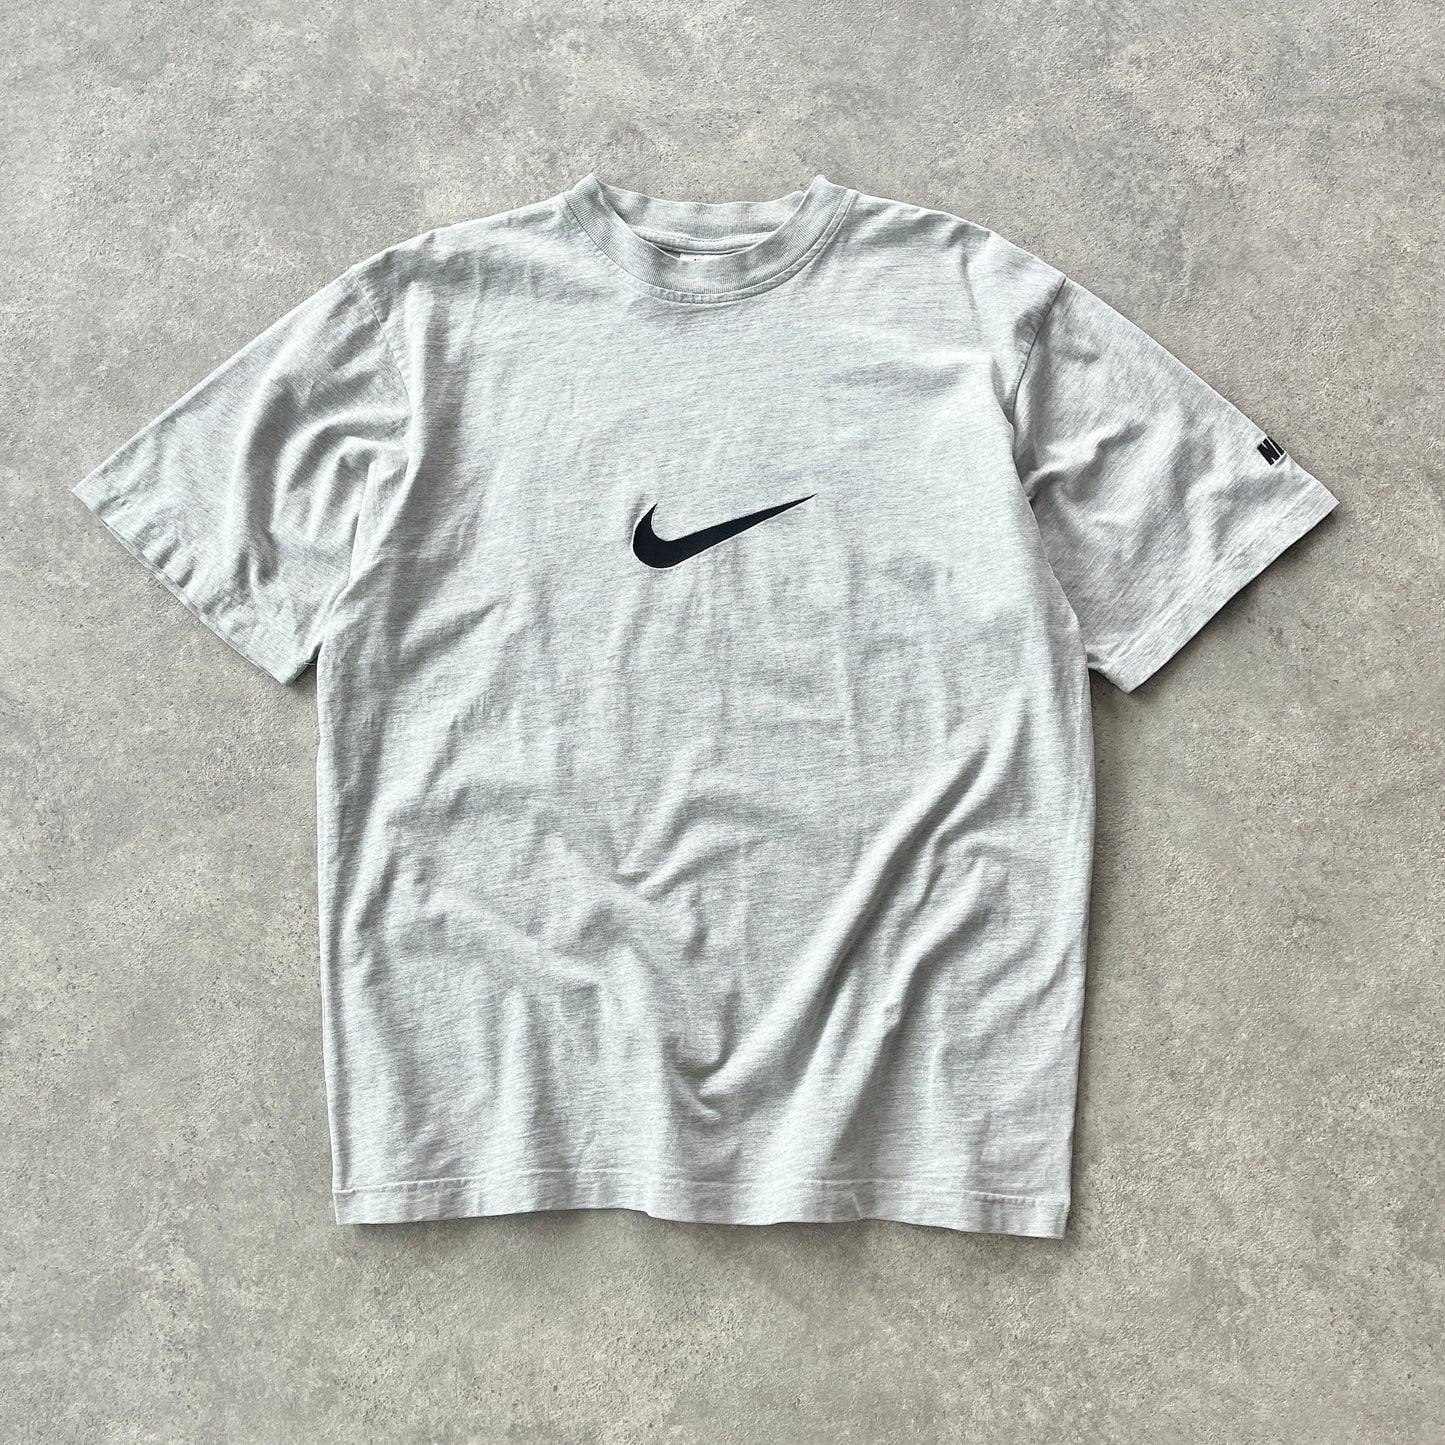 Nike 1990s heavyweight embroidered spellout t-shirt (L)